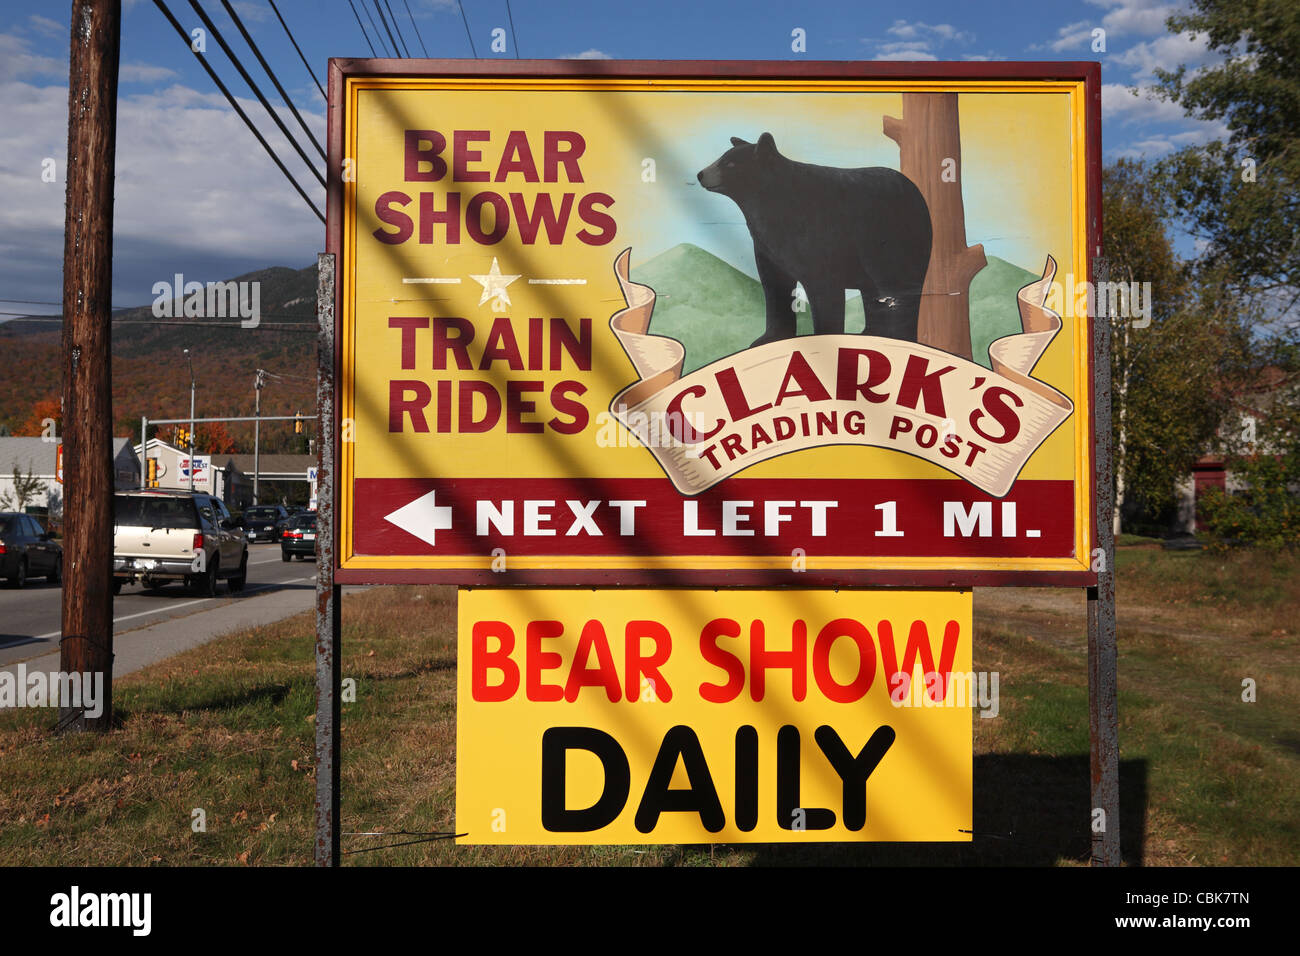 Road side sign advertising train rides and bear shows and Clark's Trading Post, Lincoln, New Hampshire, USA Stock Photo